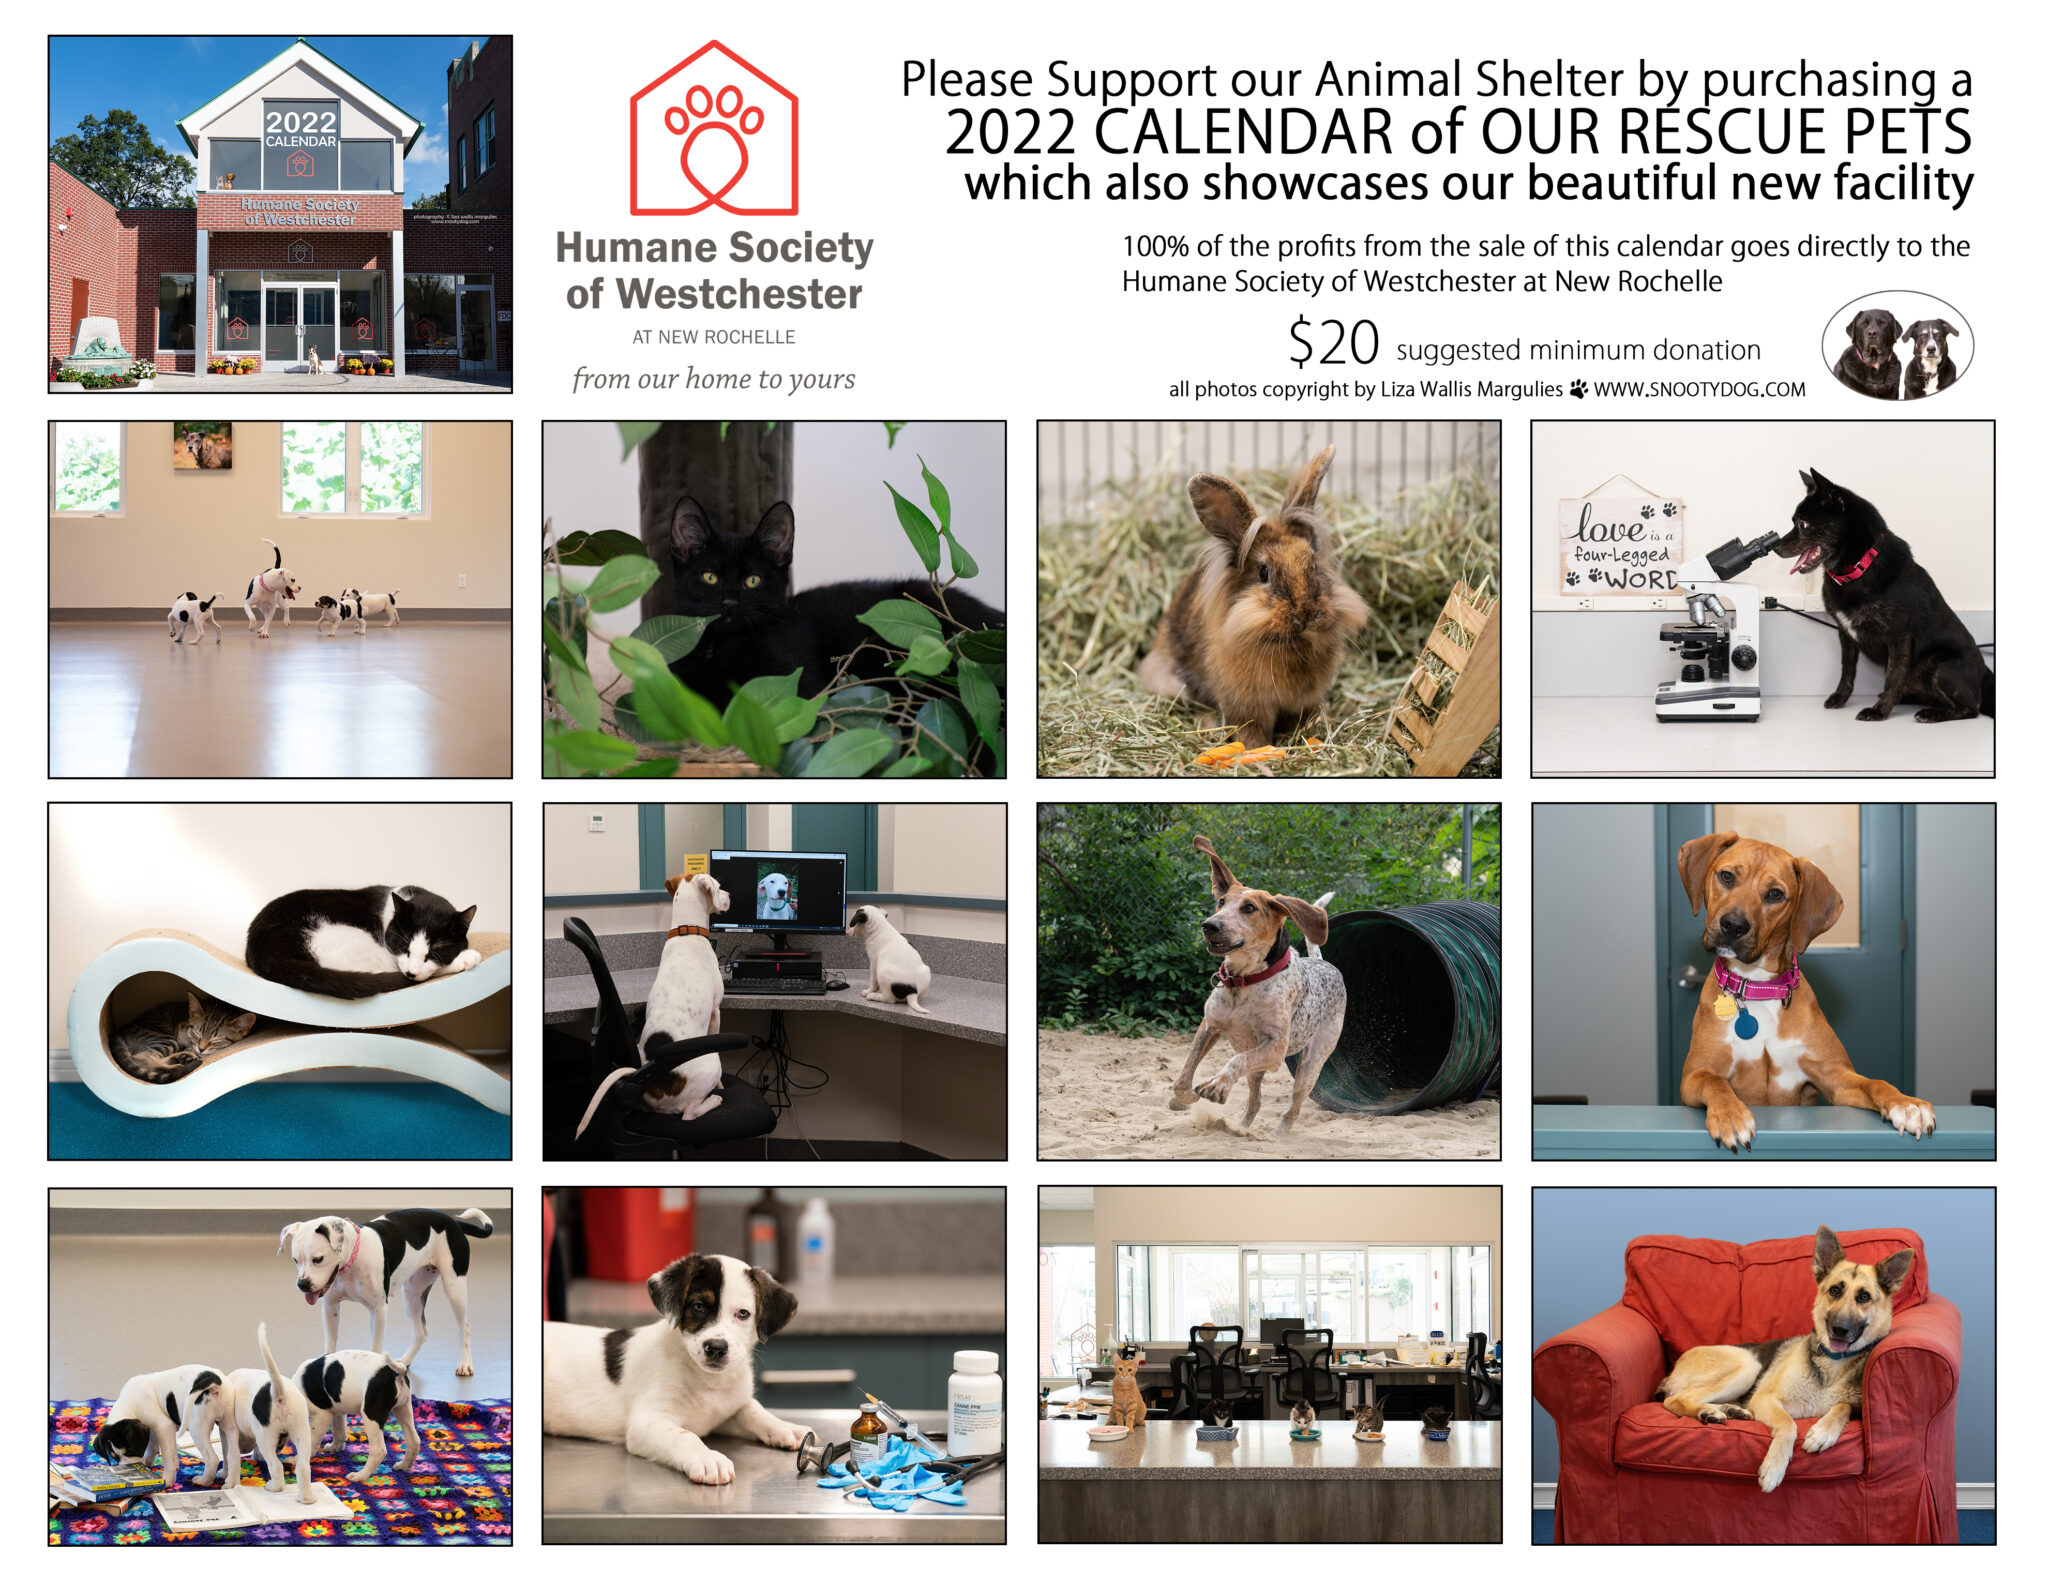 The Humane Society of Westchester’s 2022 Calendar! – Humane Society of